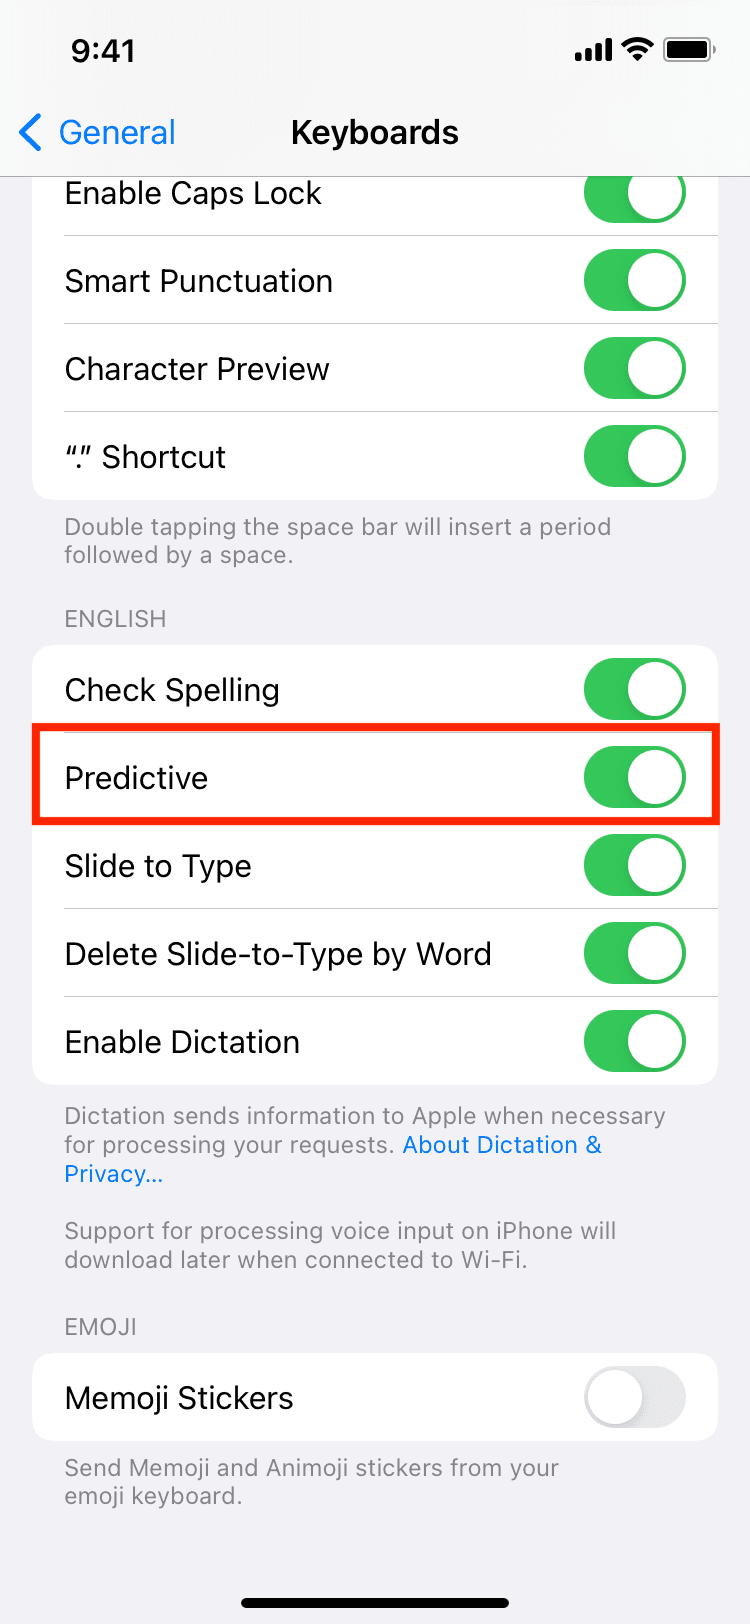 Enable Predictive for your iPhone keyboard